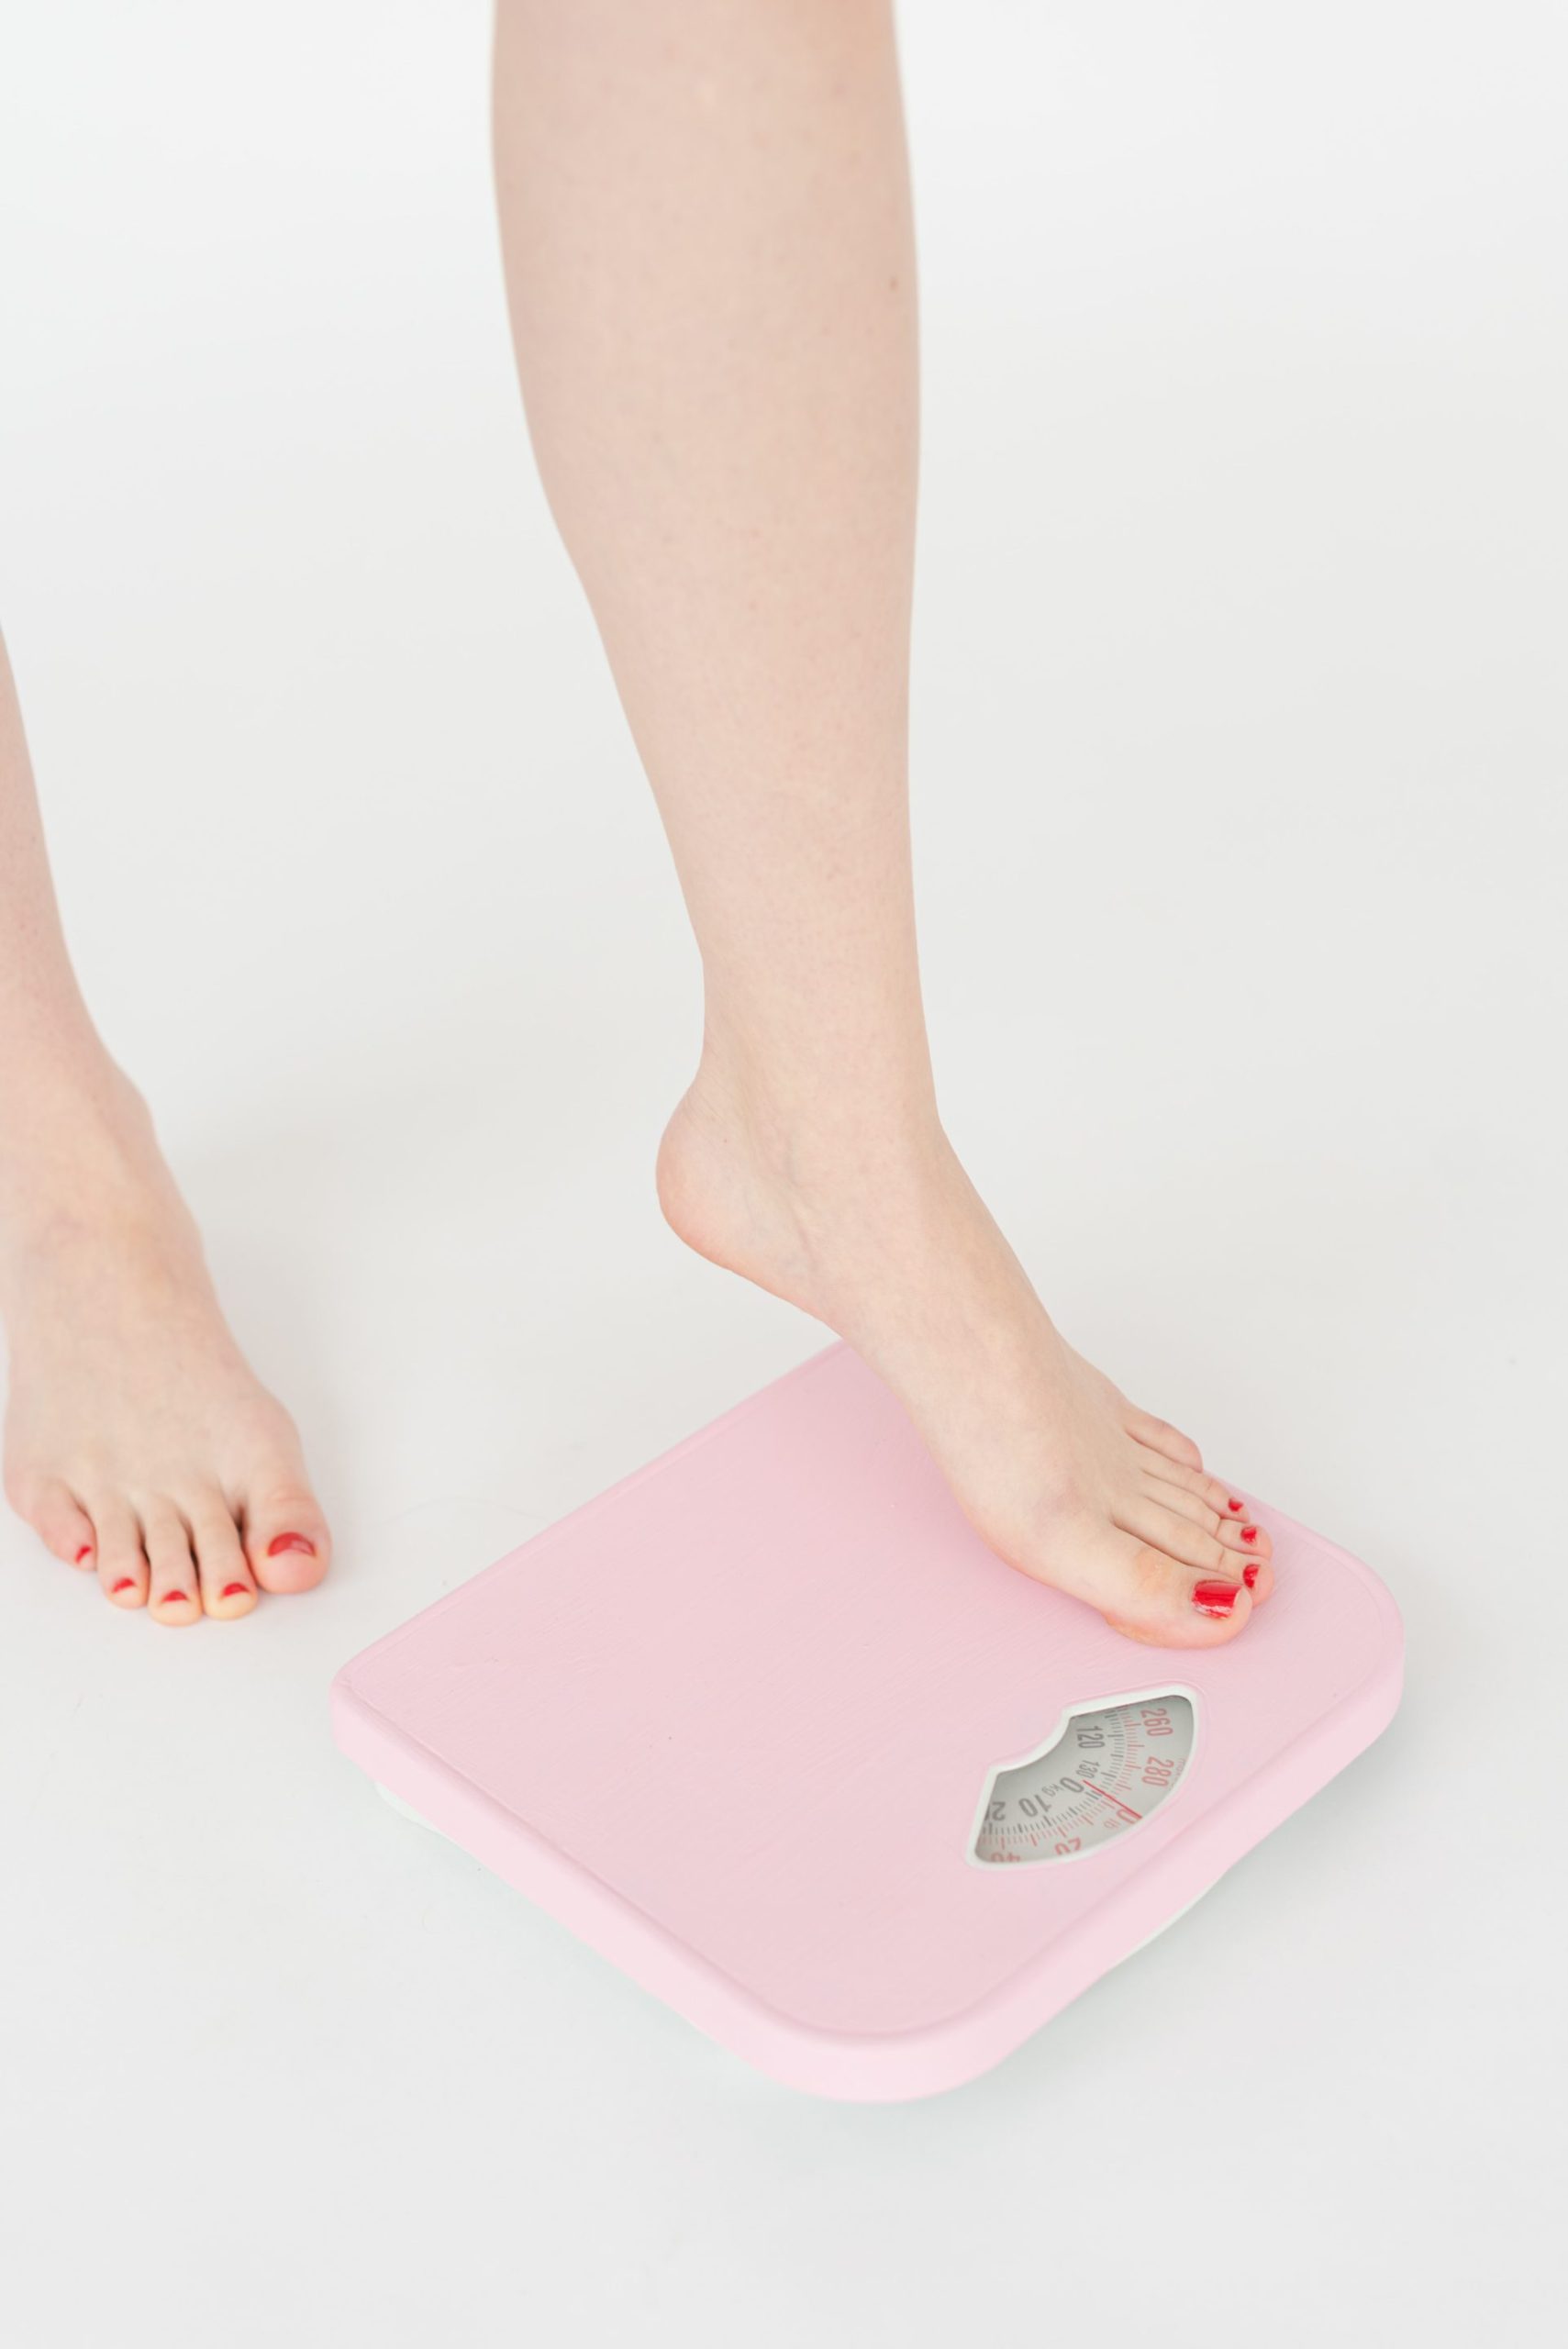 Woman stepping on a scale after taking Mounjaro prescribed for weight loss